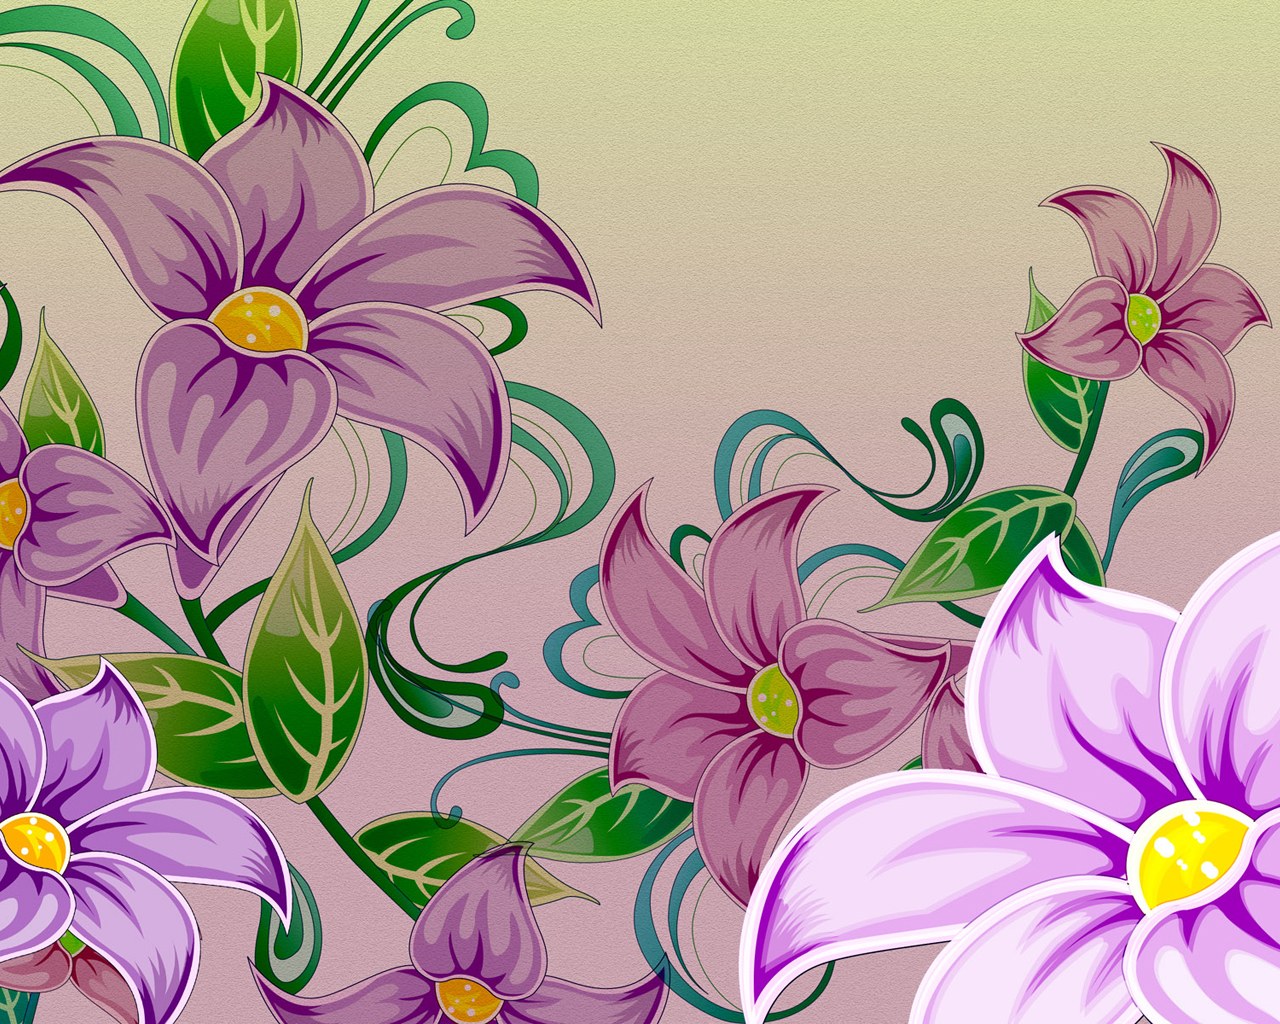 Pictures Of Flower Designs - Image to u